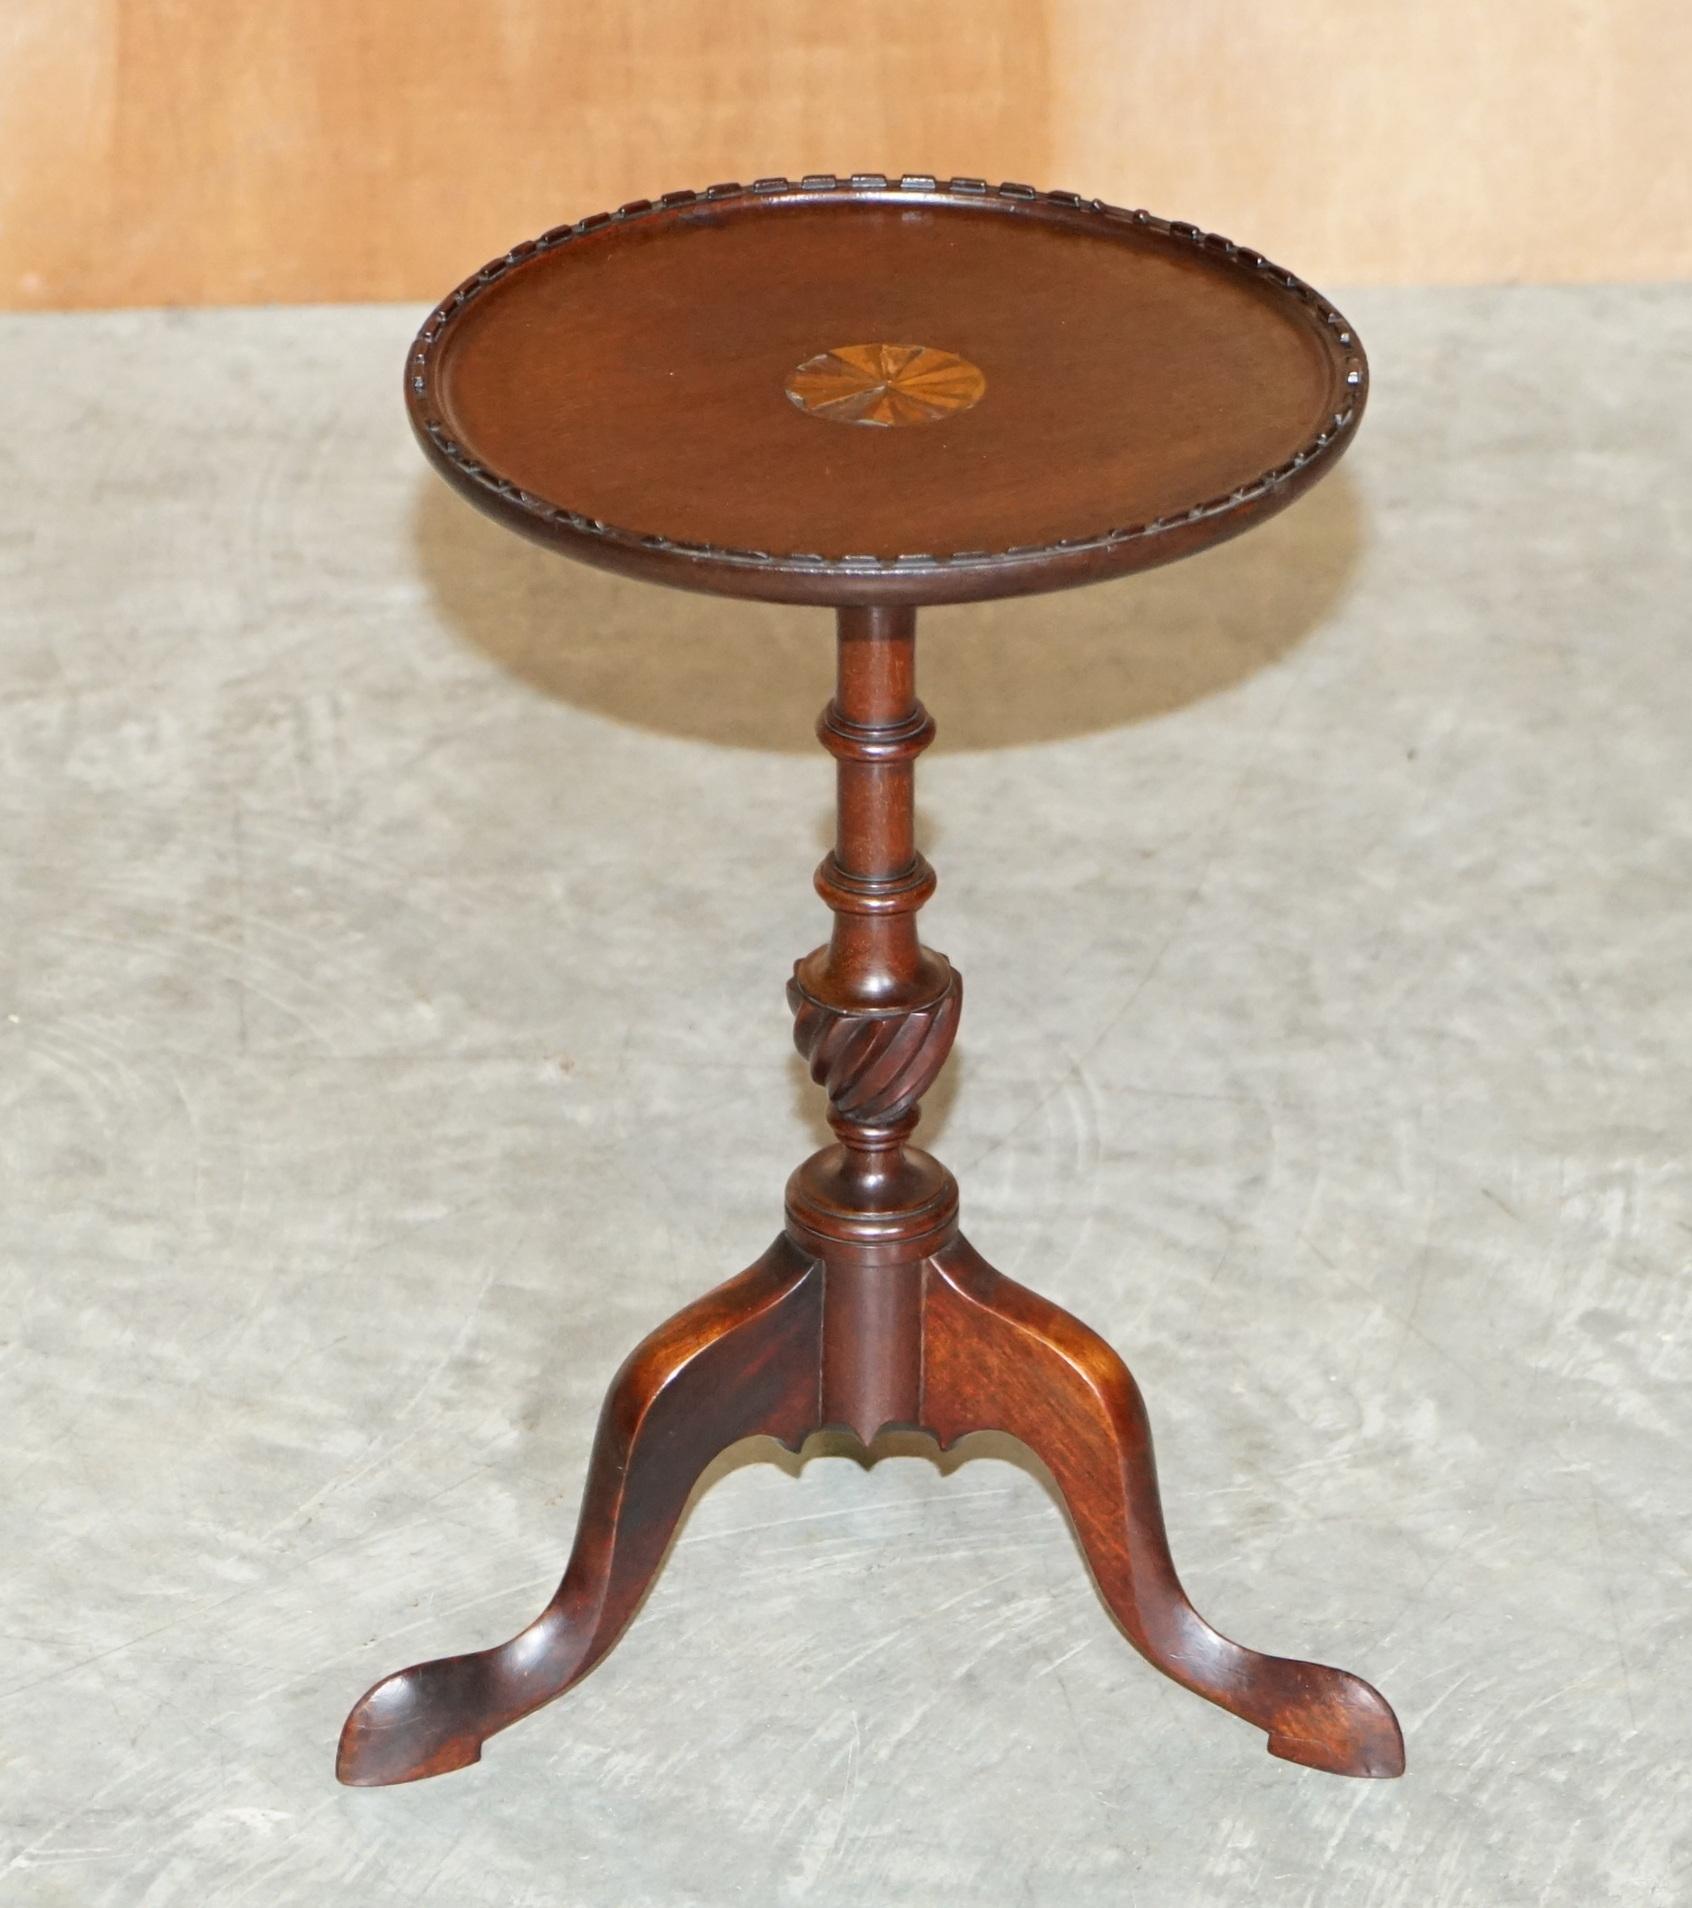 We are delighted to offer for sale this lovely late Victorian Sheraton Revival tripod table 

A very good looking well made and decorative piece, it sits well in any setting and is very unitarian. The piece has the Sheraton revival inlay to the